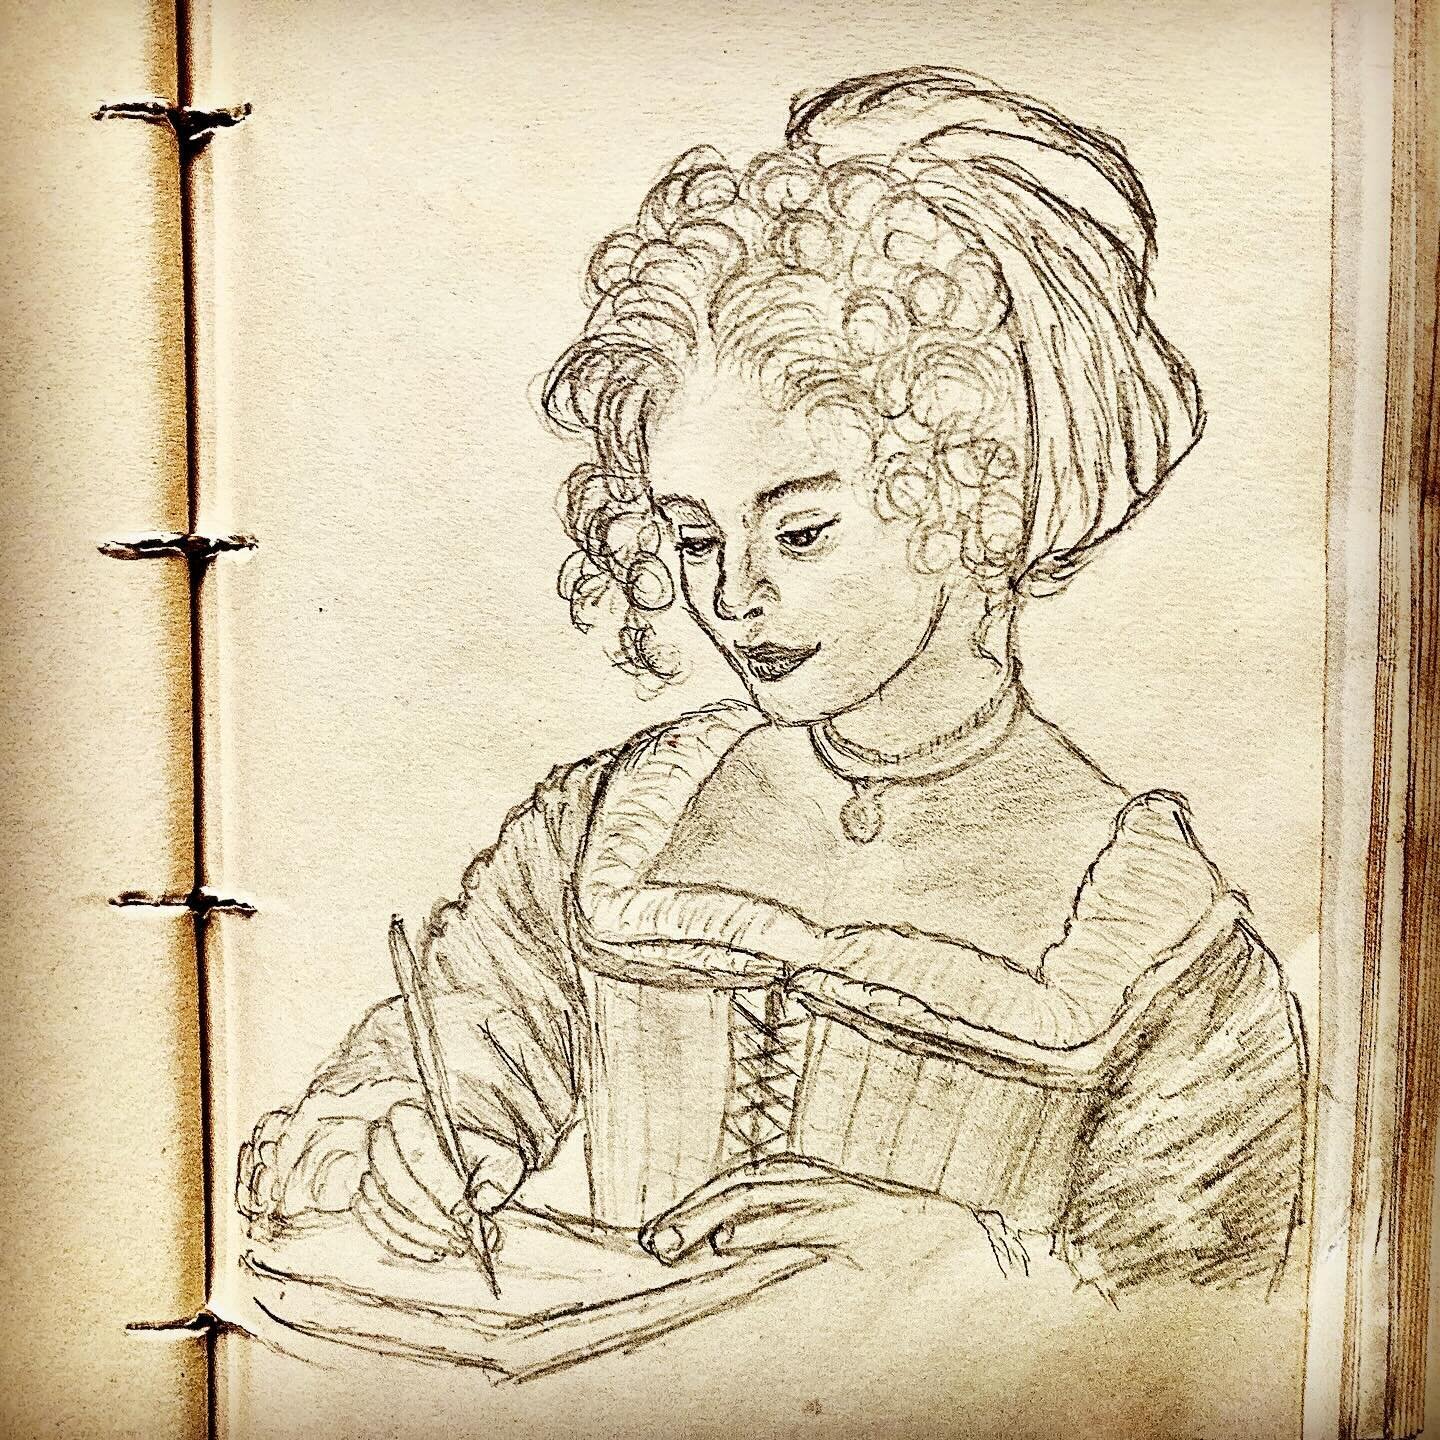 ✍️ Cecelia&rsquo;s Sketchbook

🧑&zwj;🎨 This sketch is of Cecelia herself! A supporting character in my new historical romance Secrets of Castle Rowley, Cecelia Rousseau is the first to warn Annabel away from moving to Castle Rowley, a suggestion th